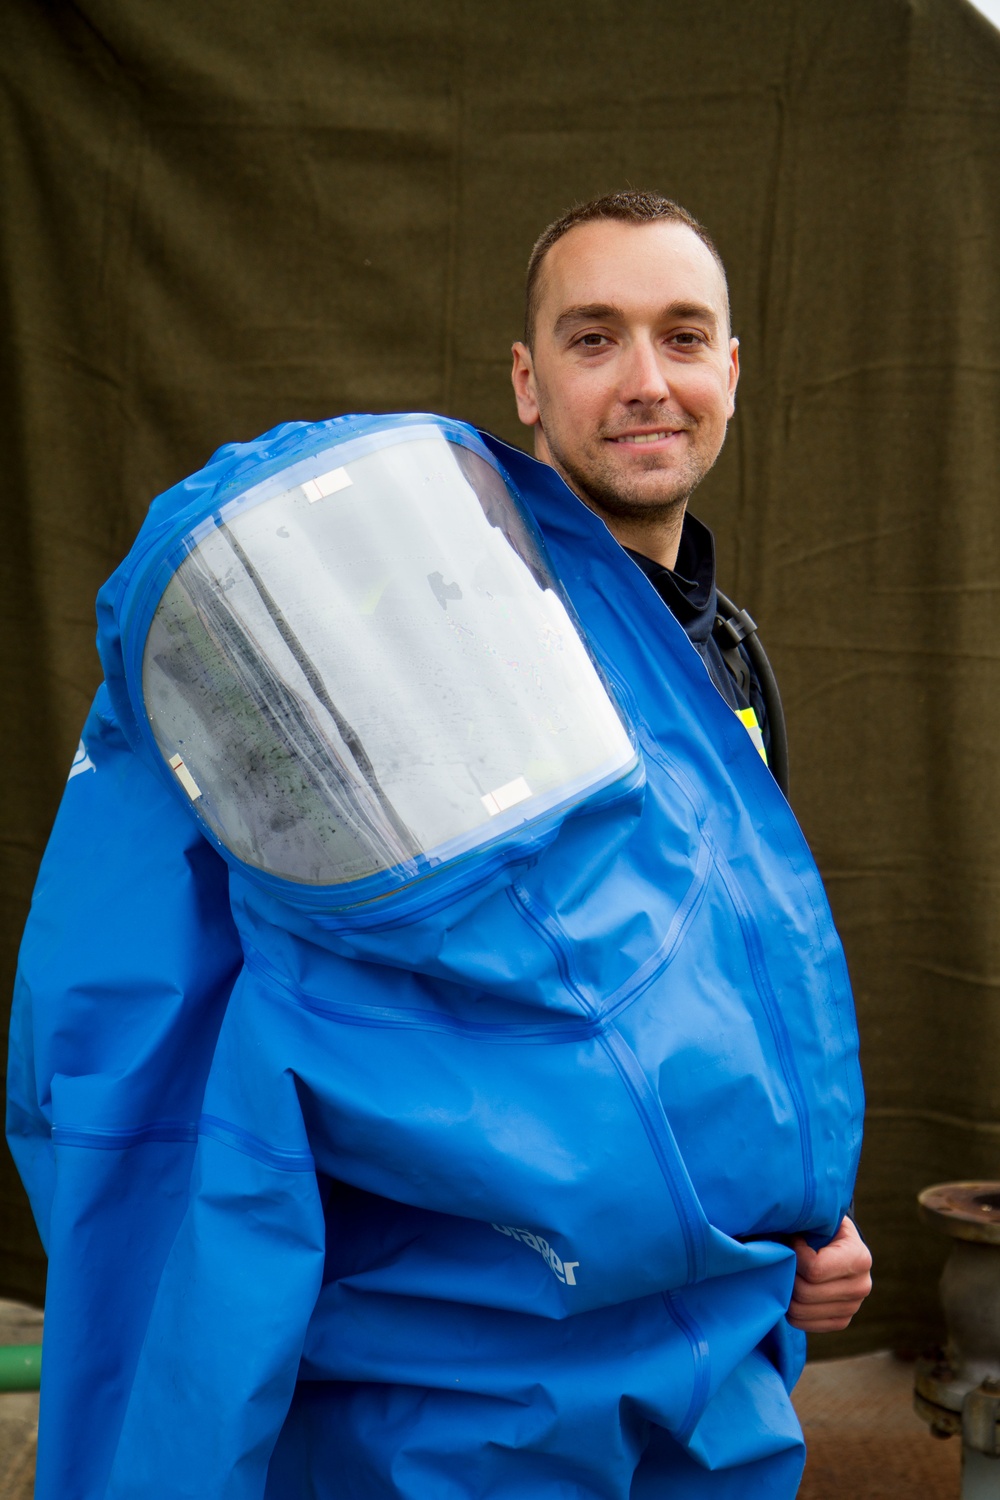 CBRN suits at NATO EADRCC's disaster response exercise2017